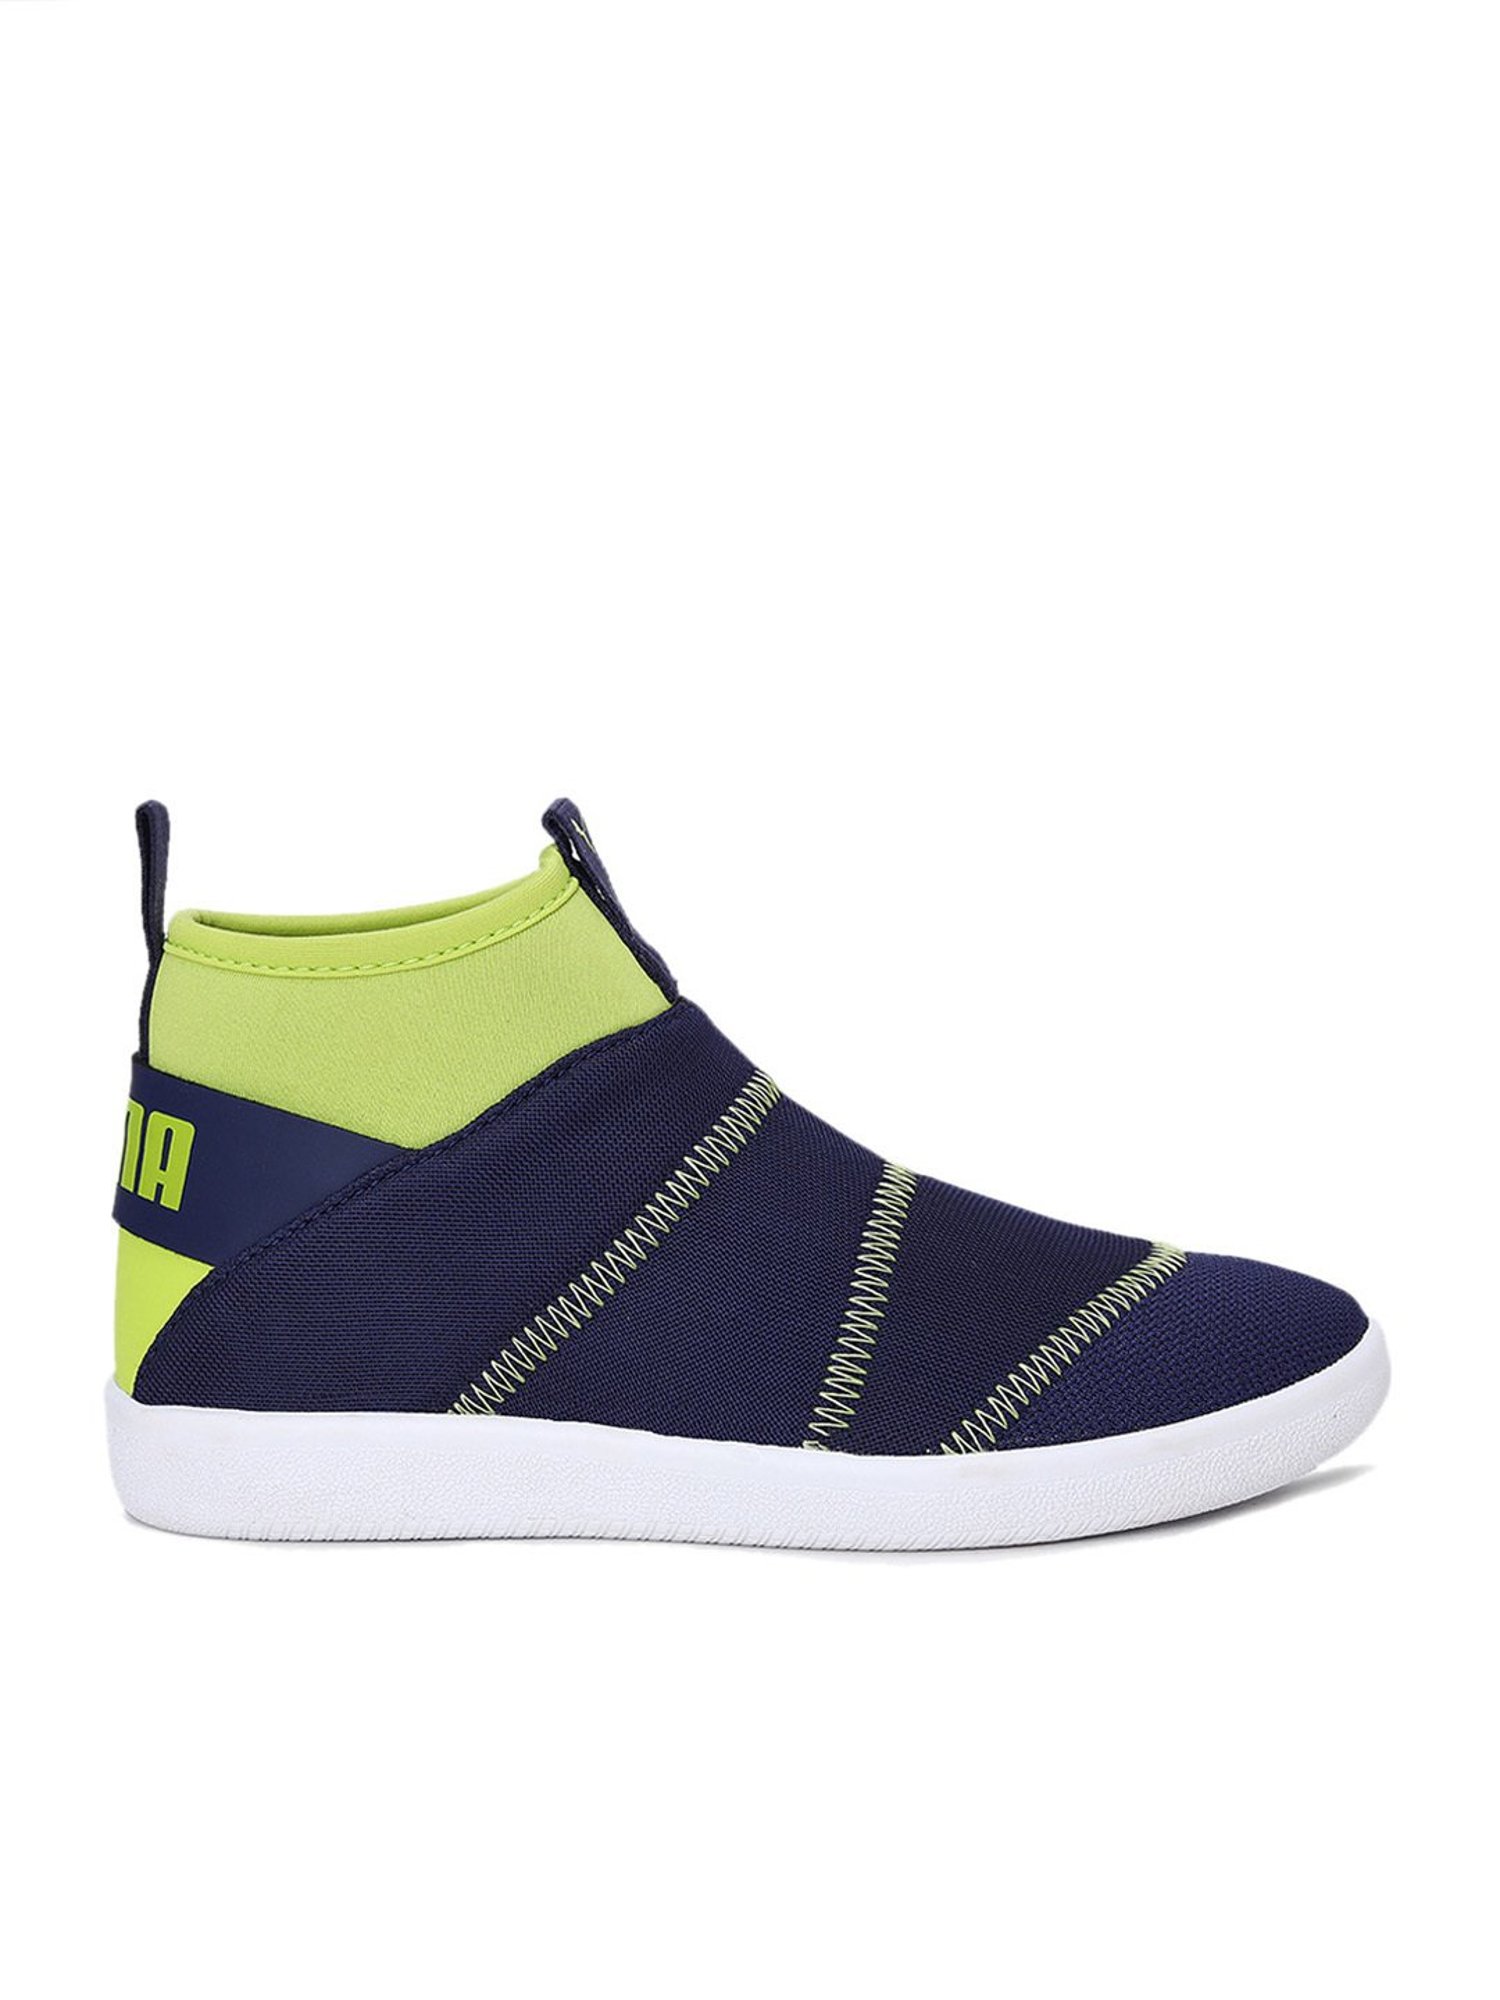 Buy Puma Men's Rick Point NU IDP Grey Sneakers Online at Low Prices in  India - Paytmmall.com